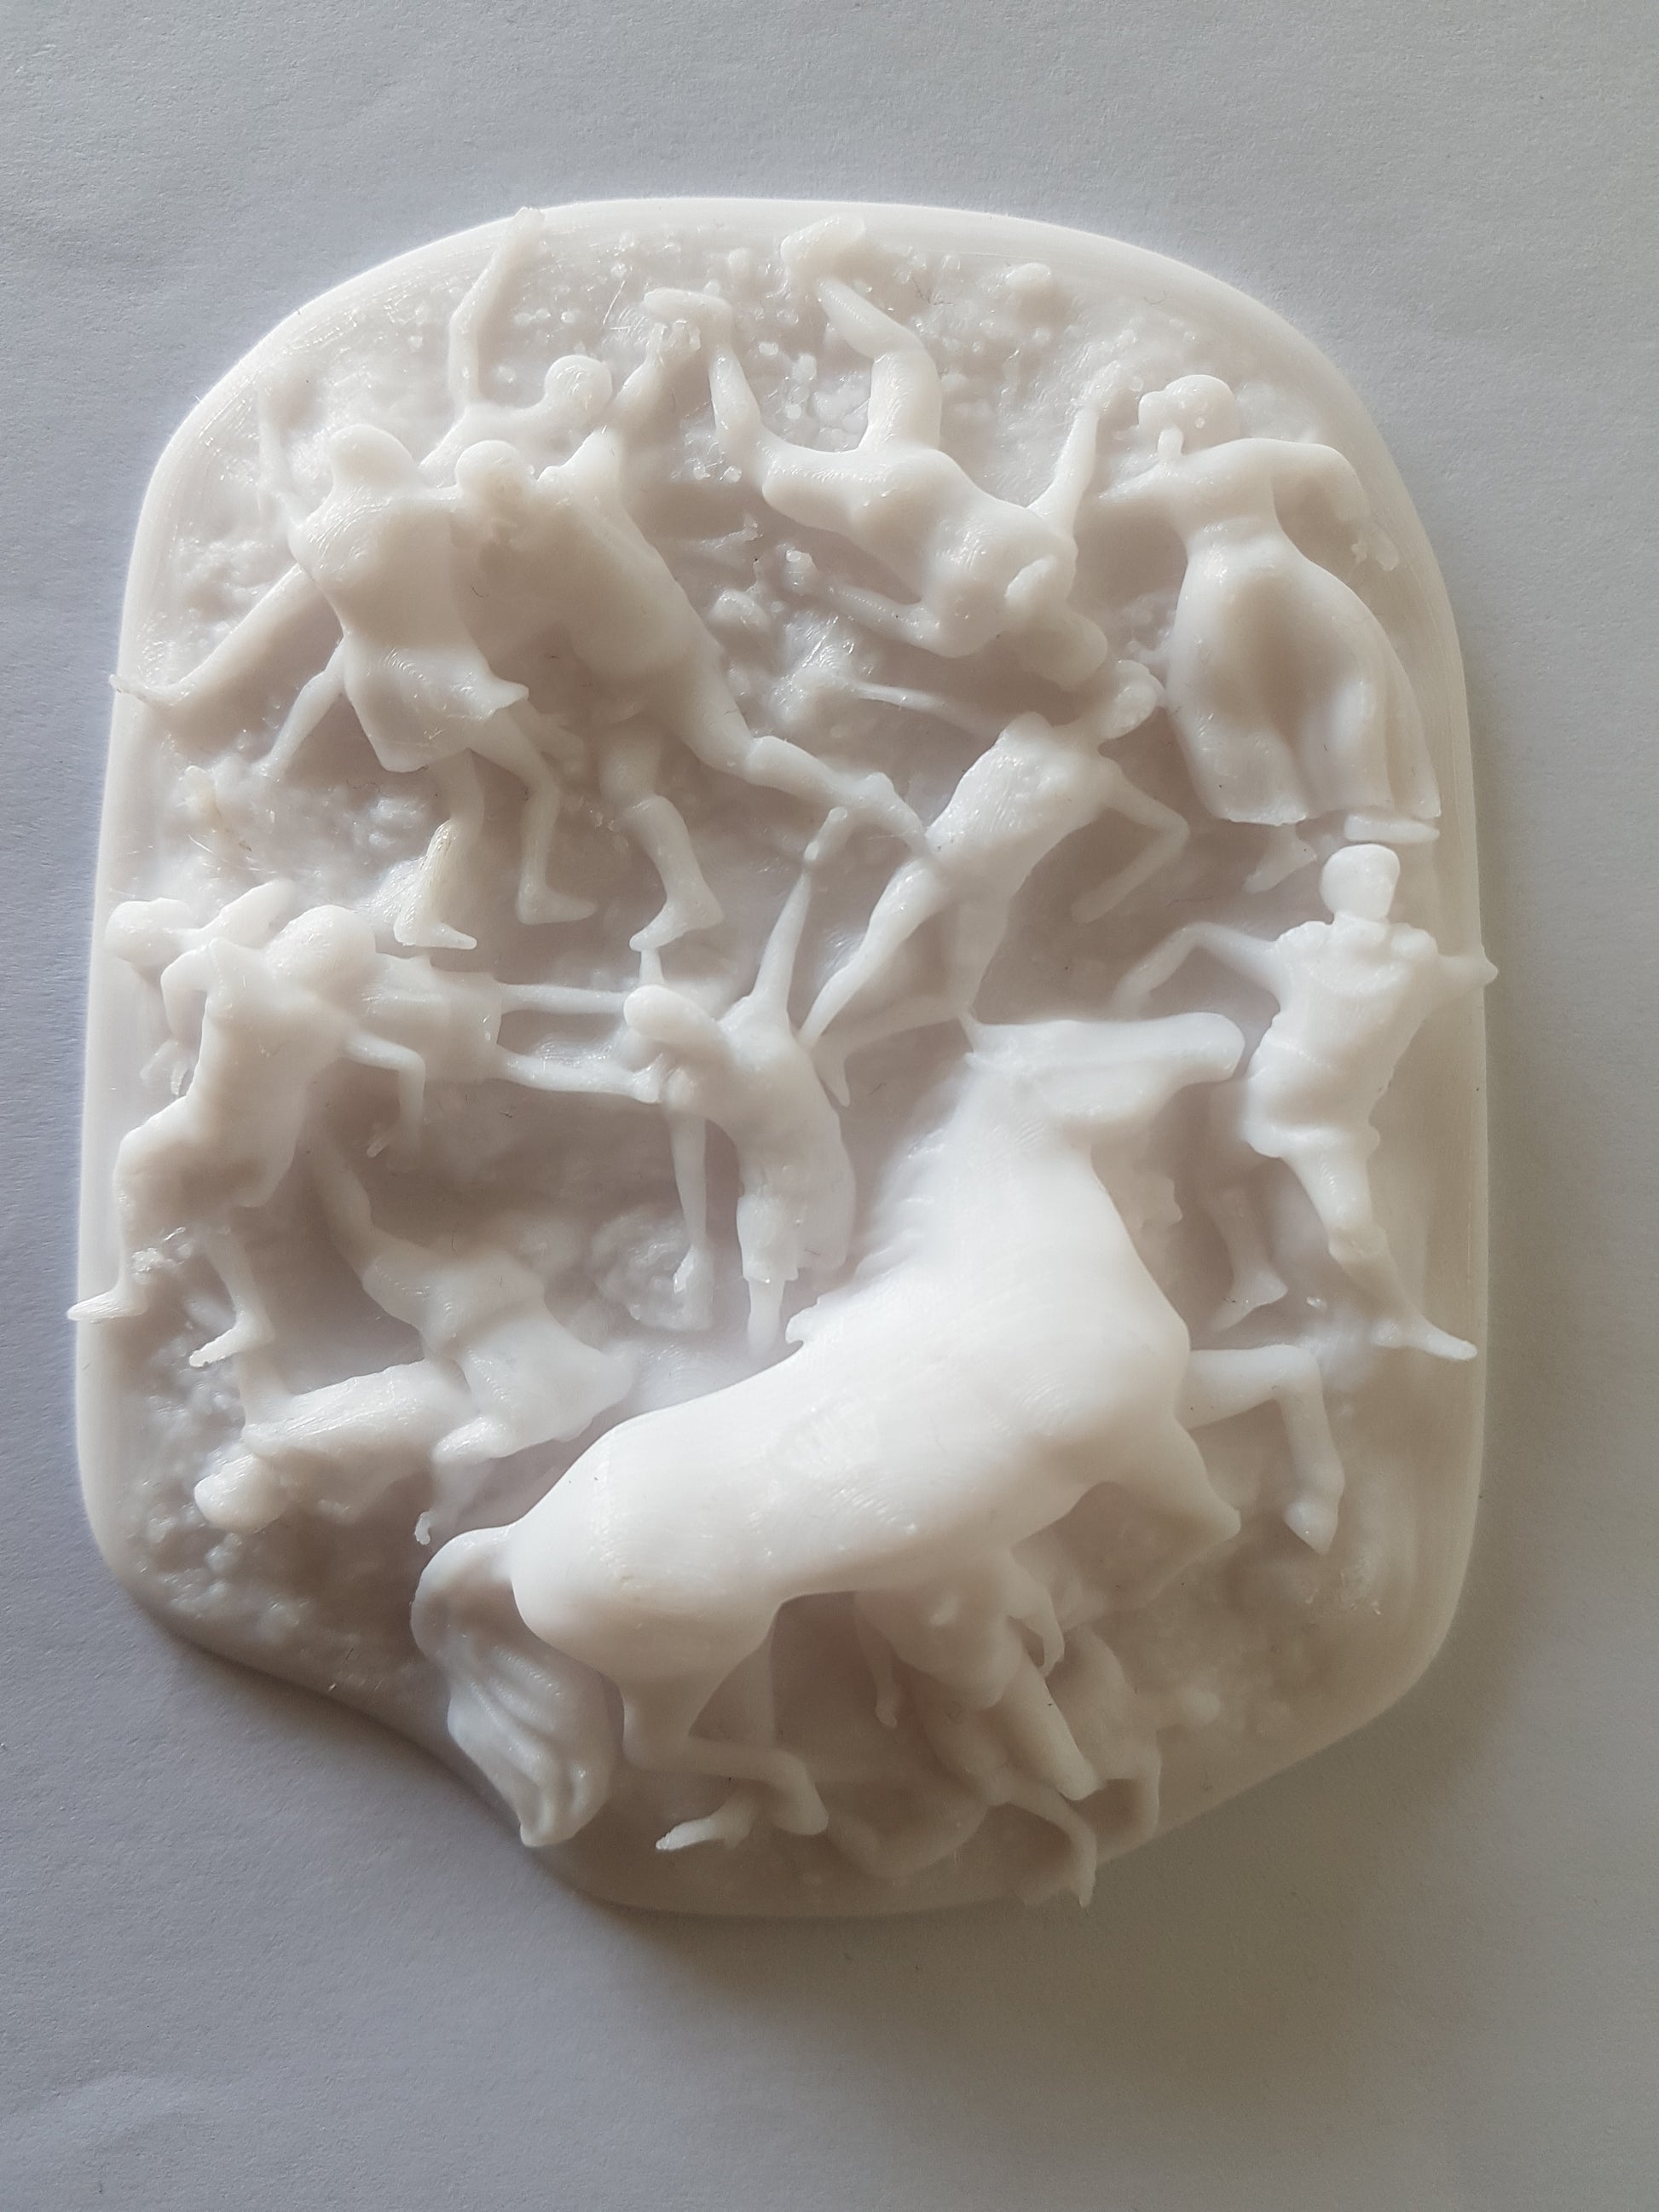 3D printed Corpse pile